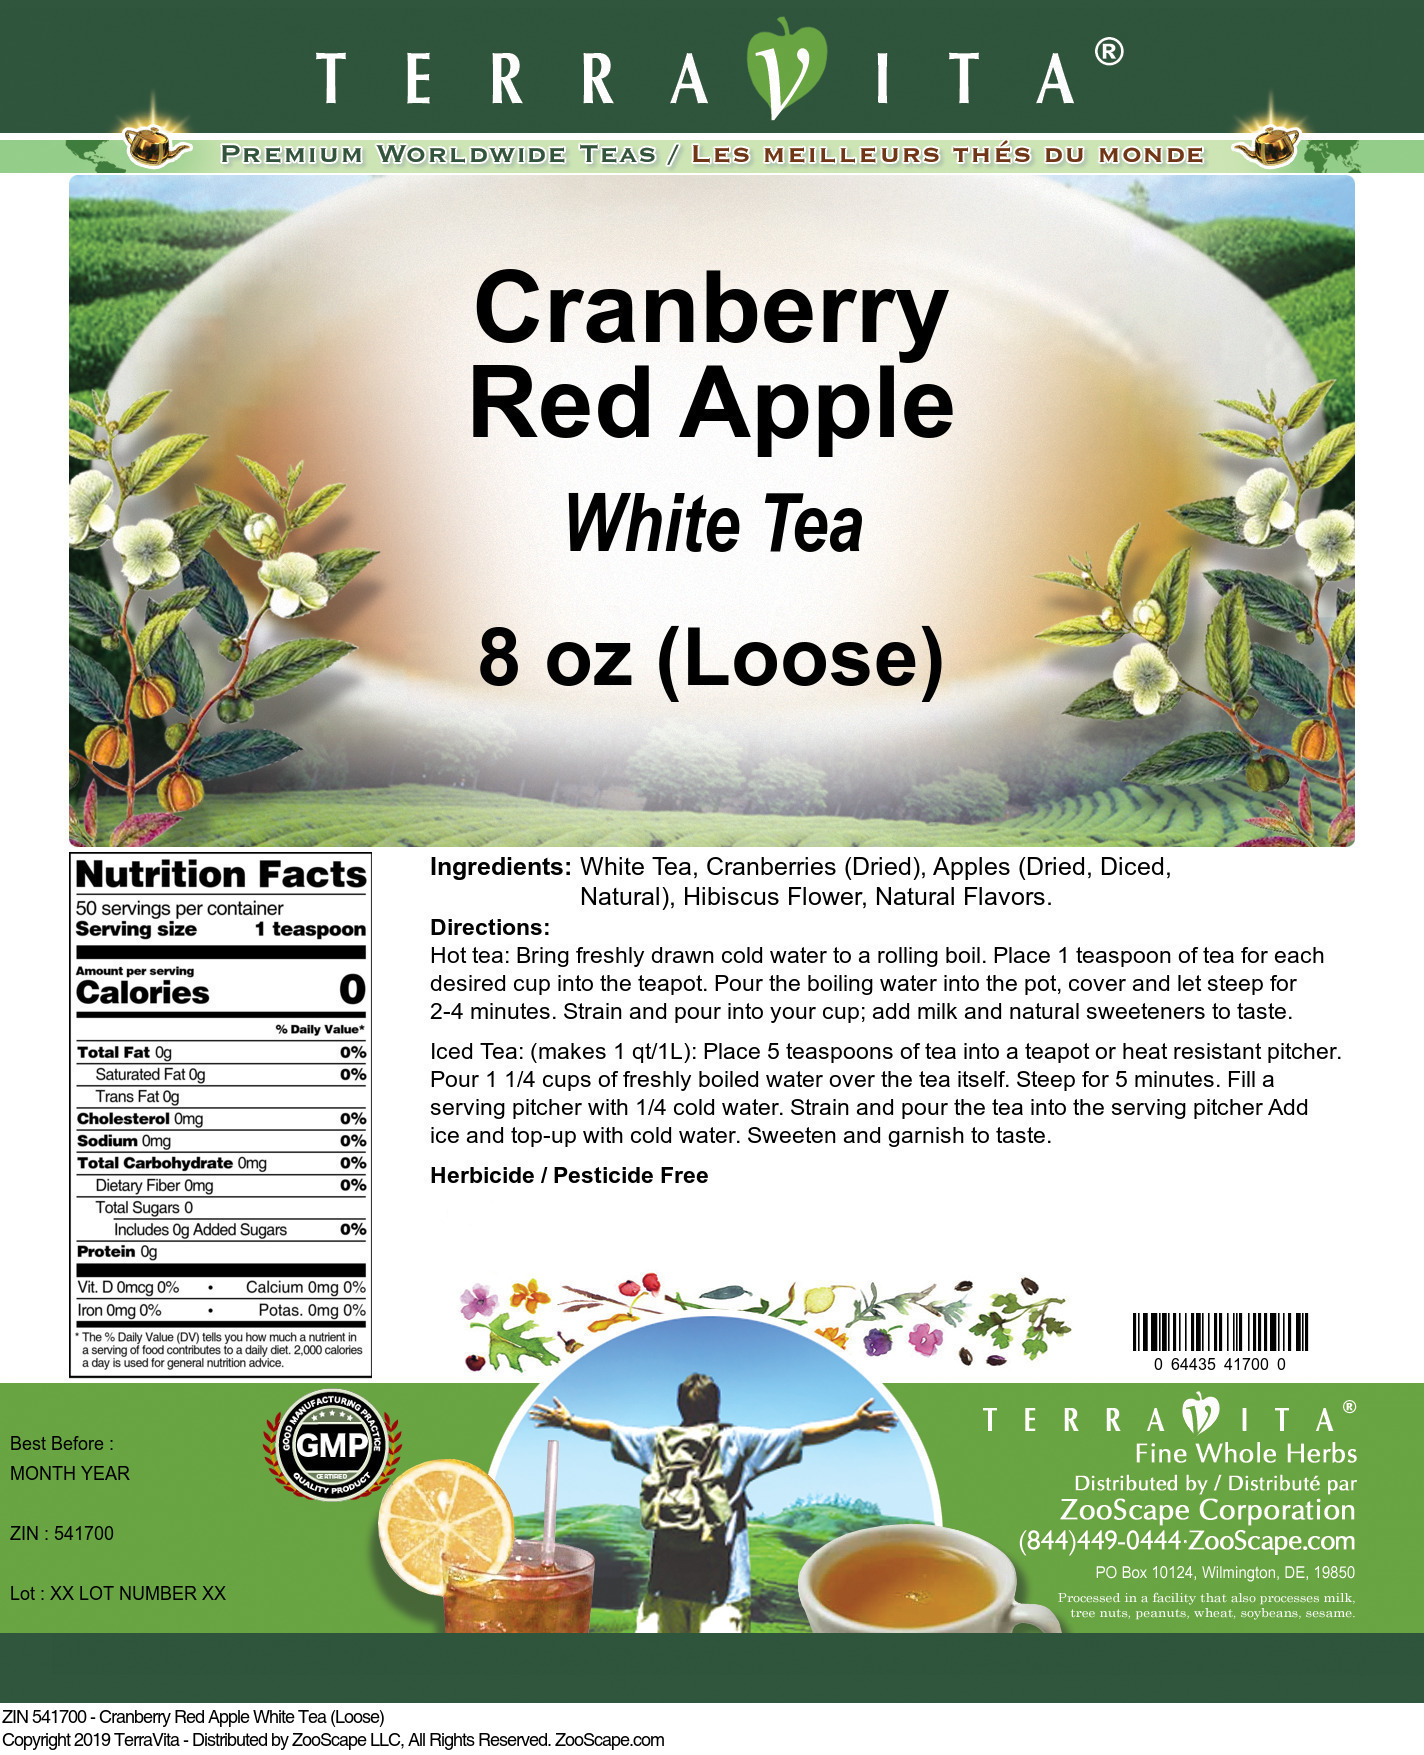 Cranberry Red Apple White Tea (Loose) - Label